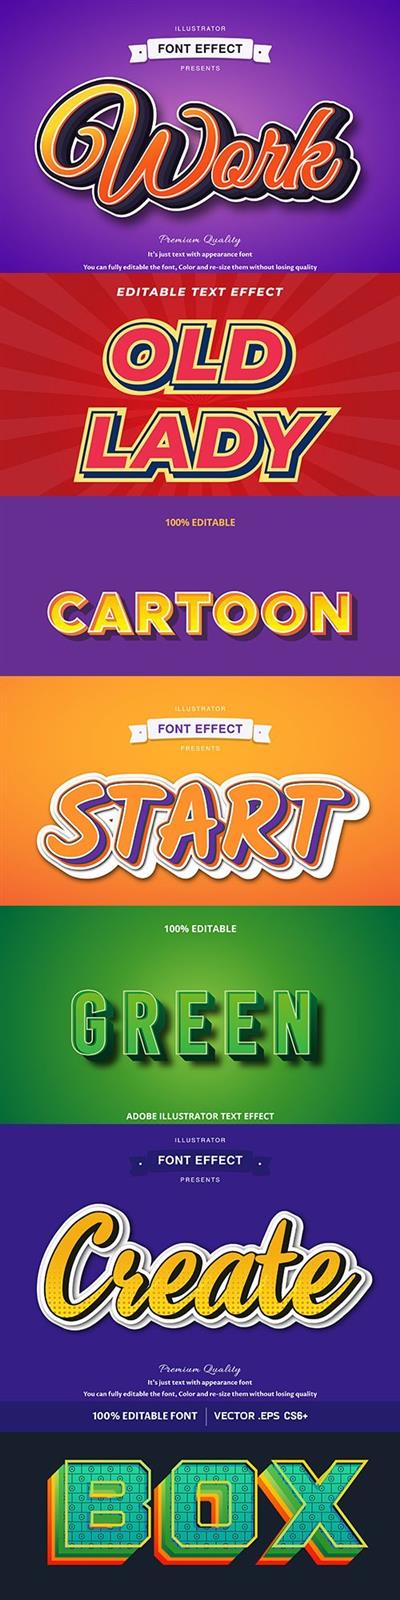 Editable font effect text collection illustration 18